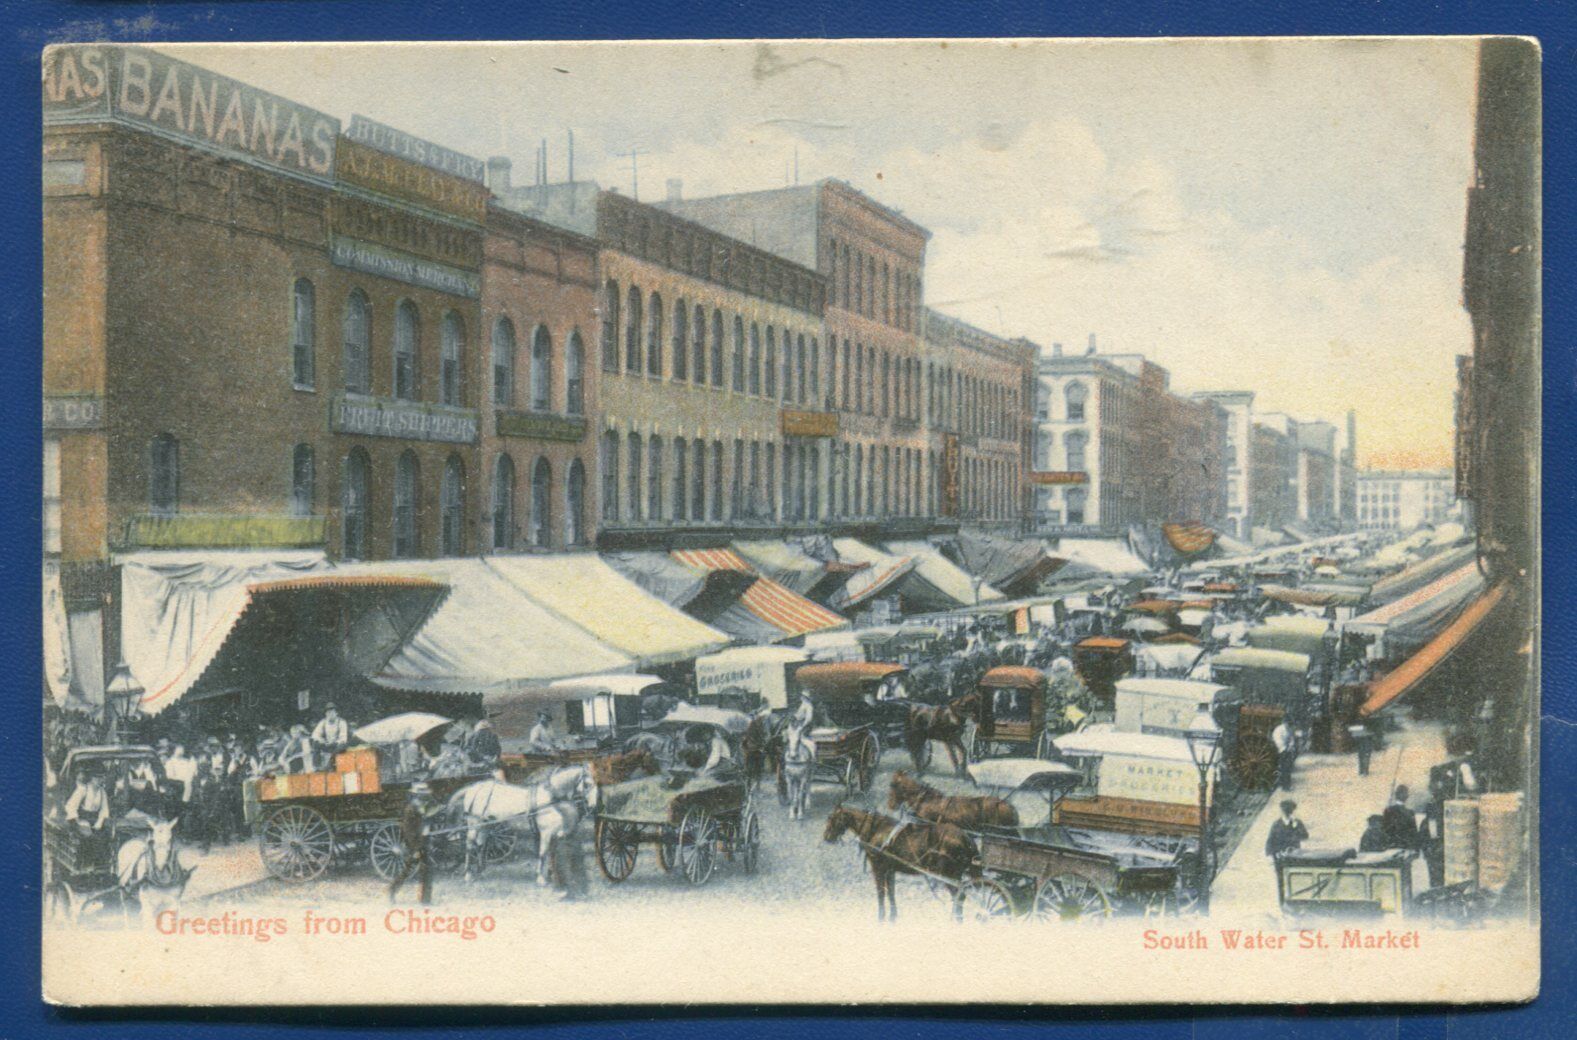 Chicago ILLinois il Greetings South Water Street Market Scene postcard